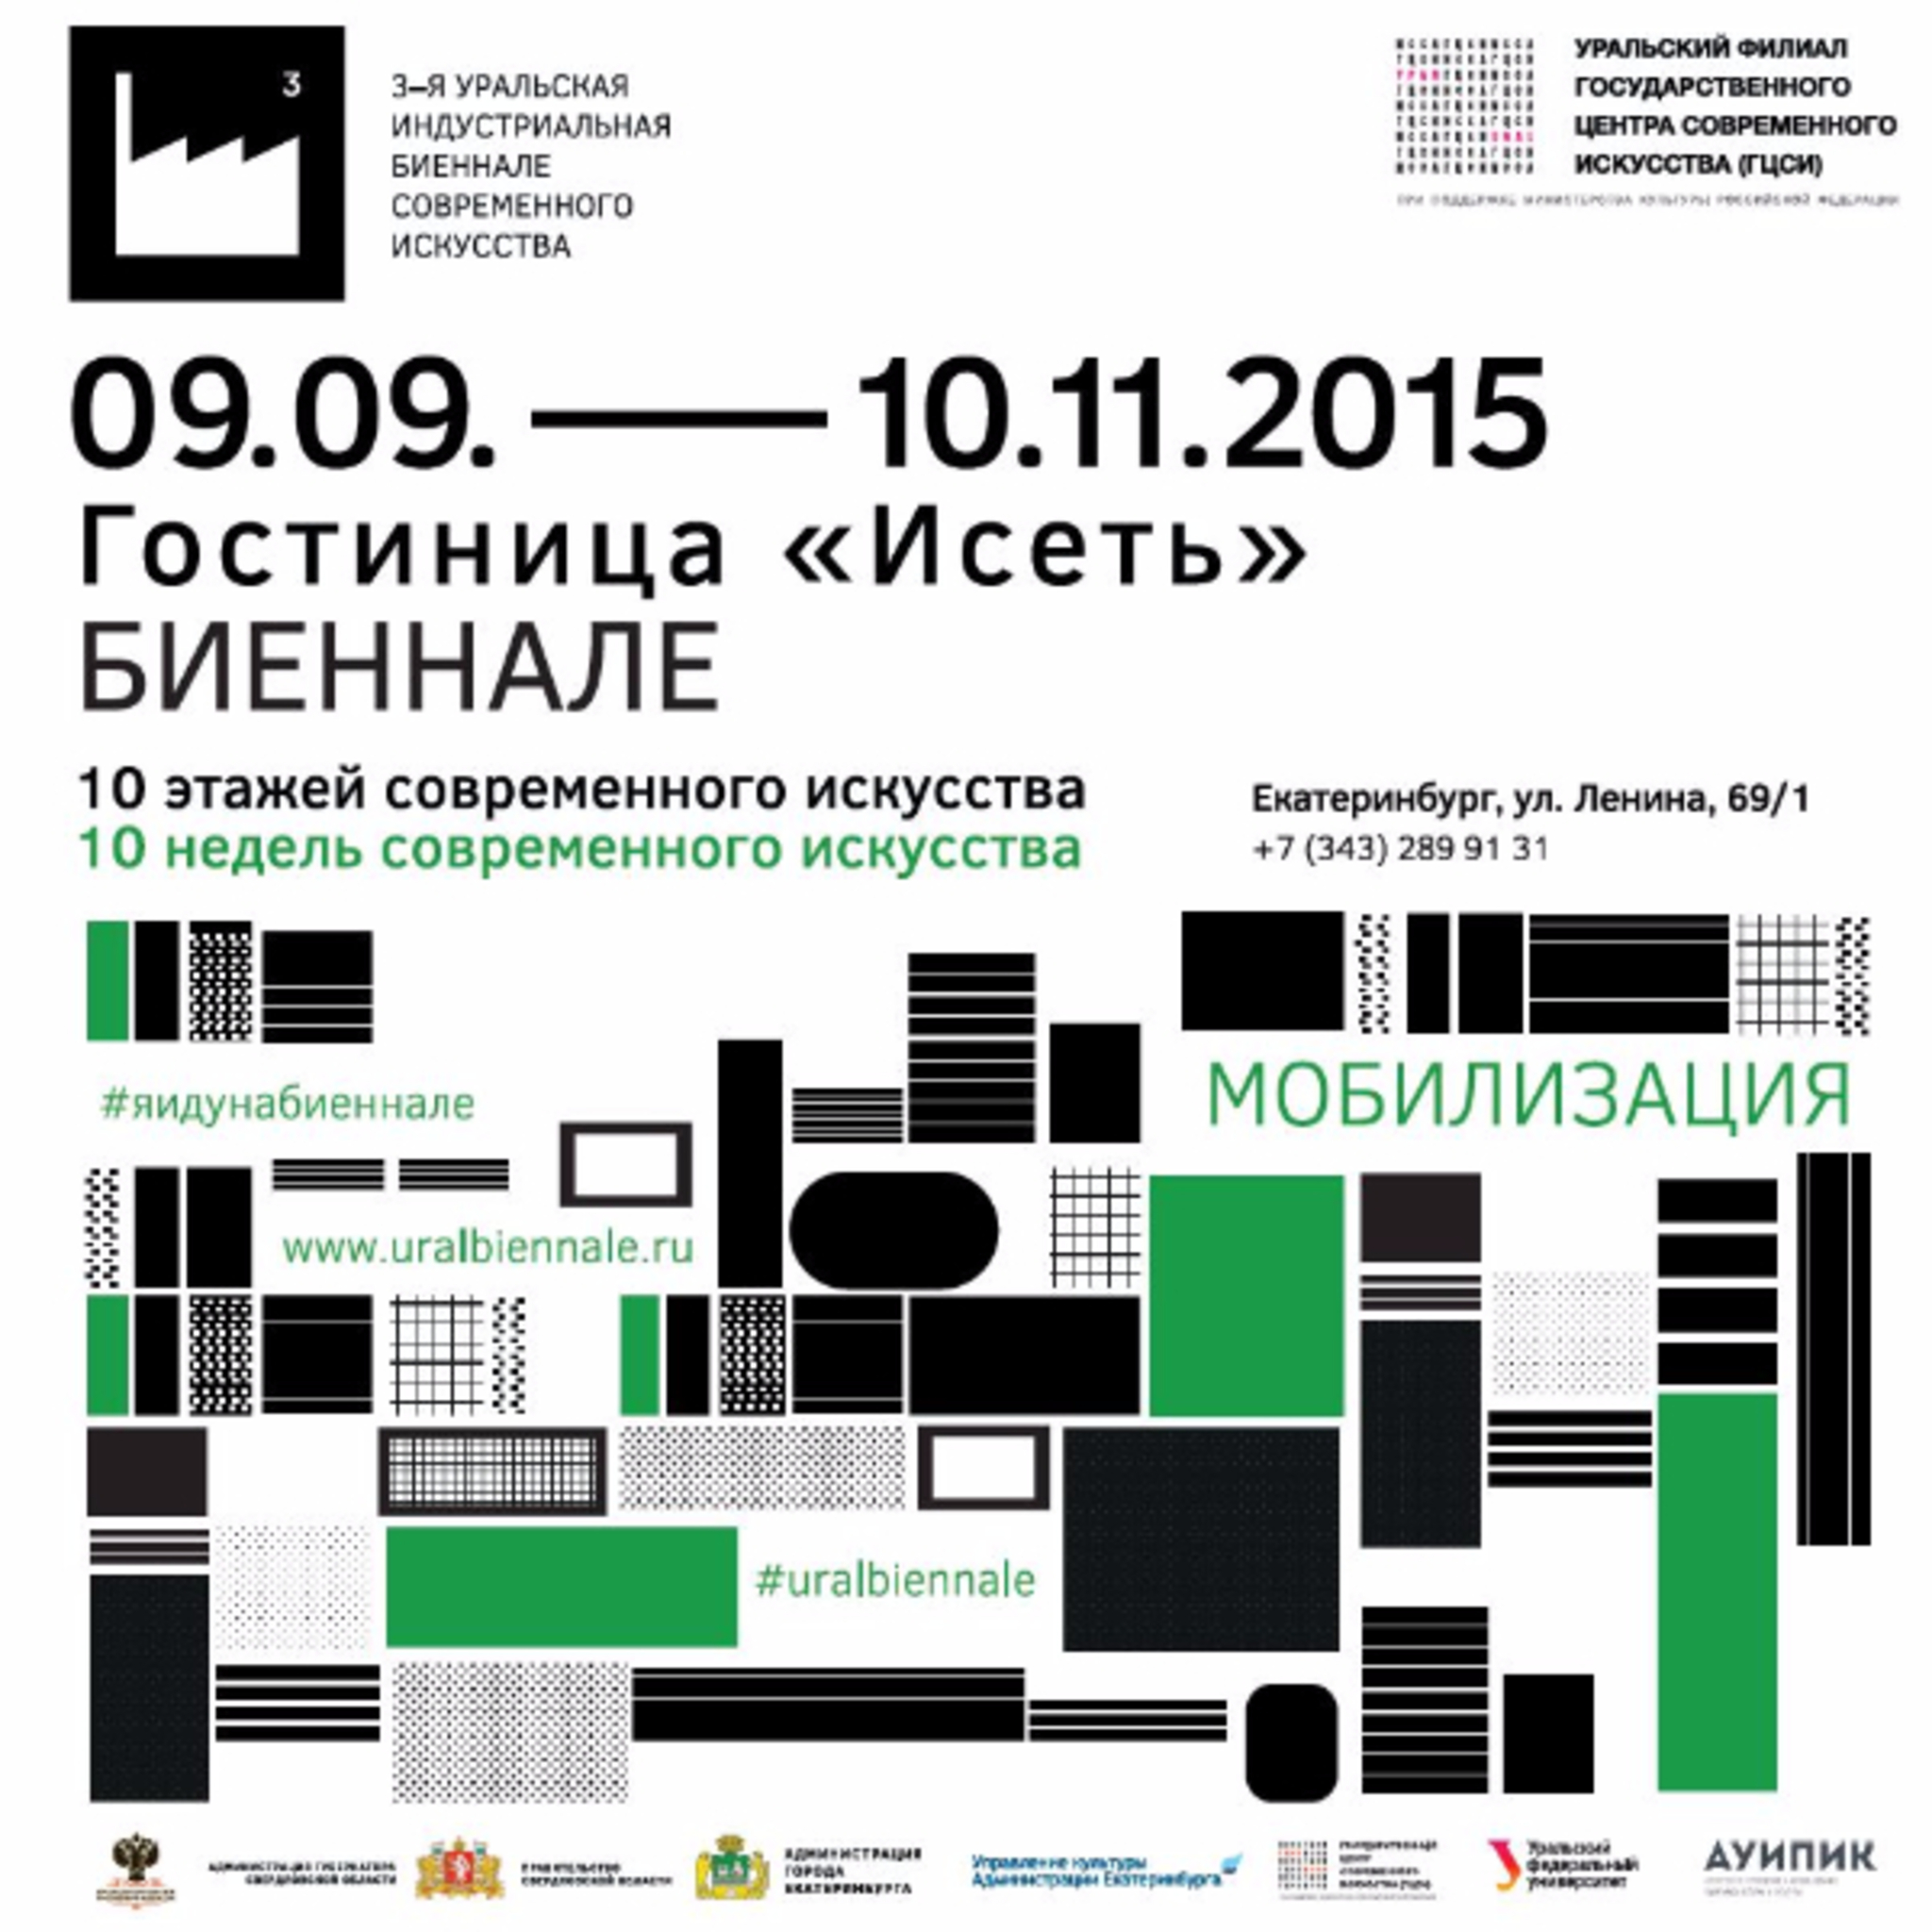 Press conference on the 3rd Ural Industrial Biennale of Contemporary Art